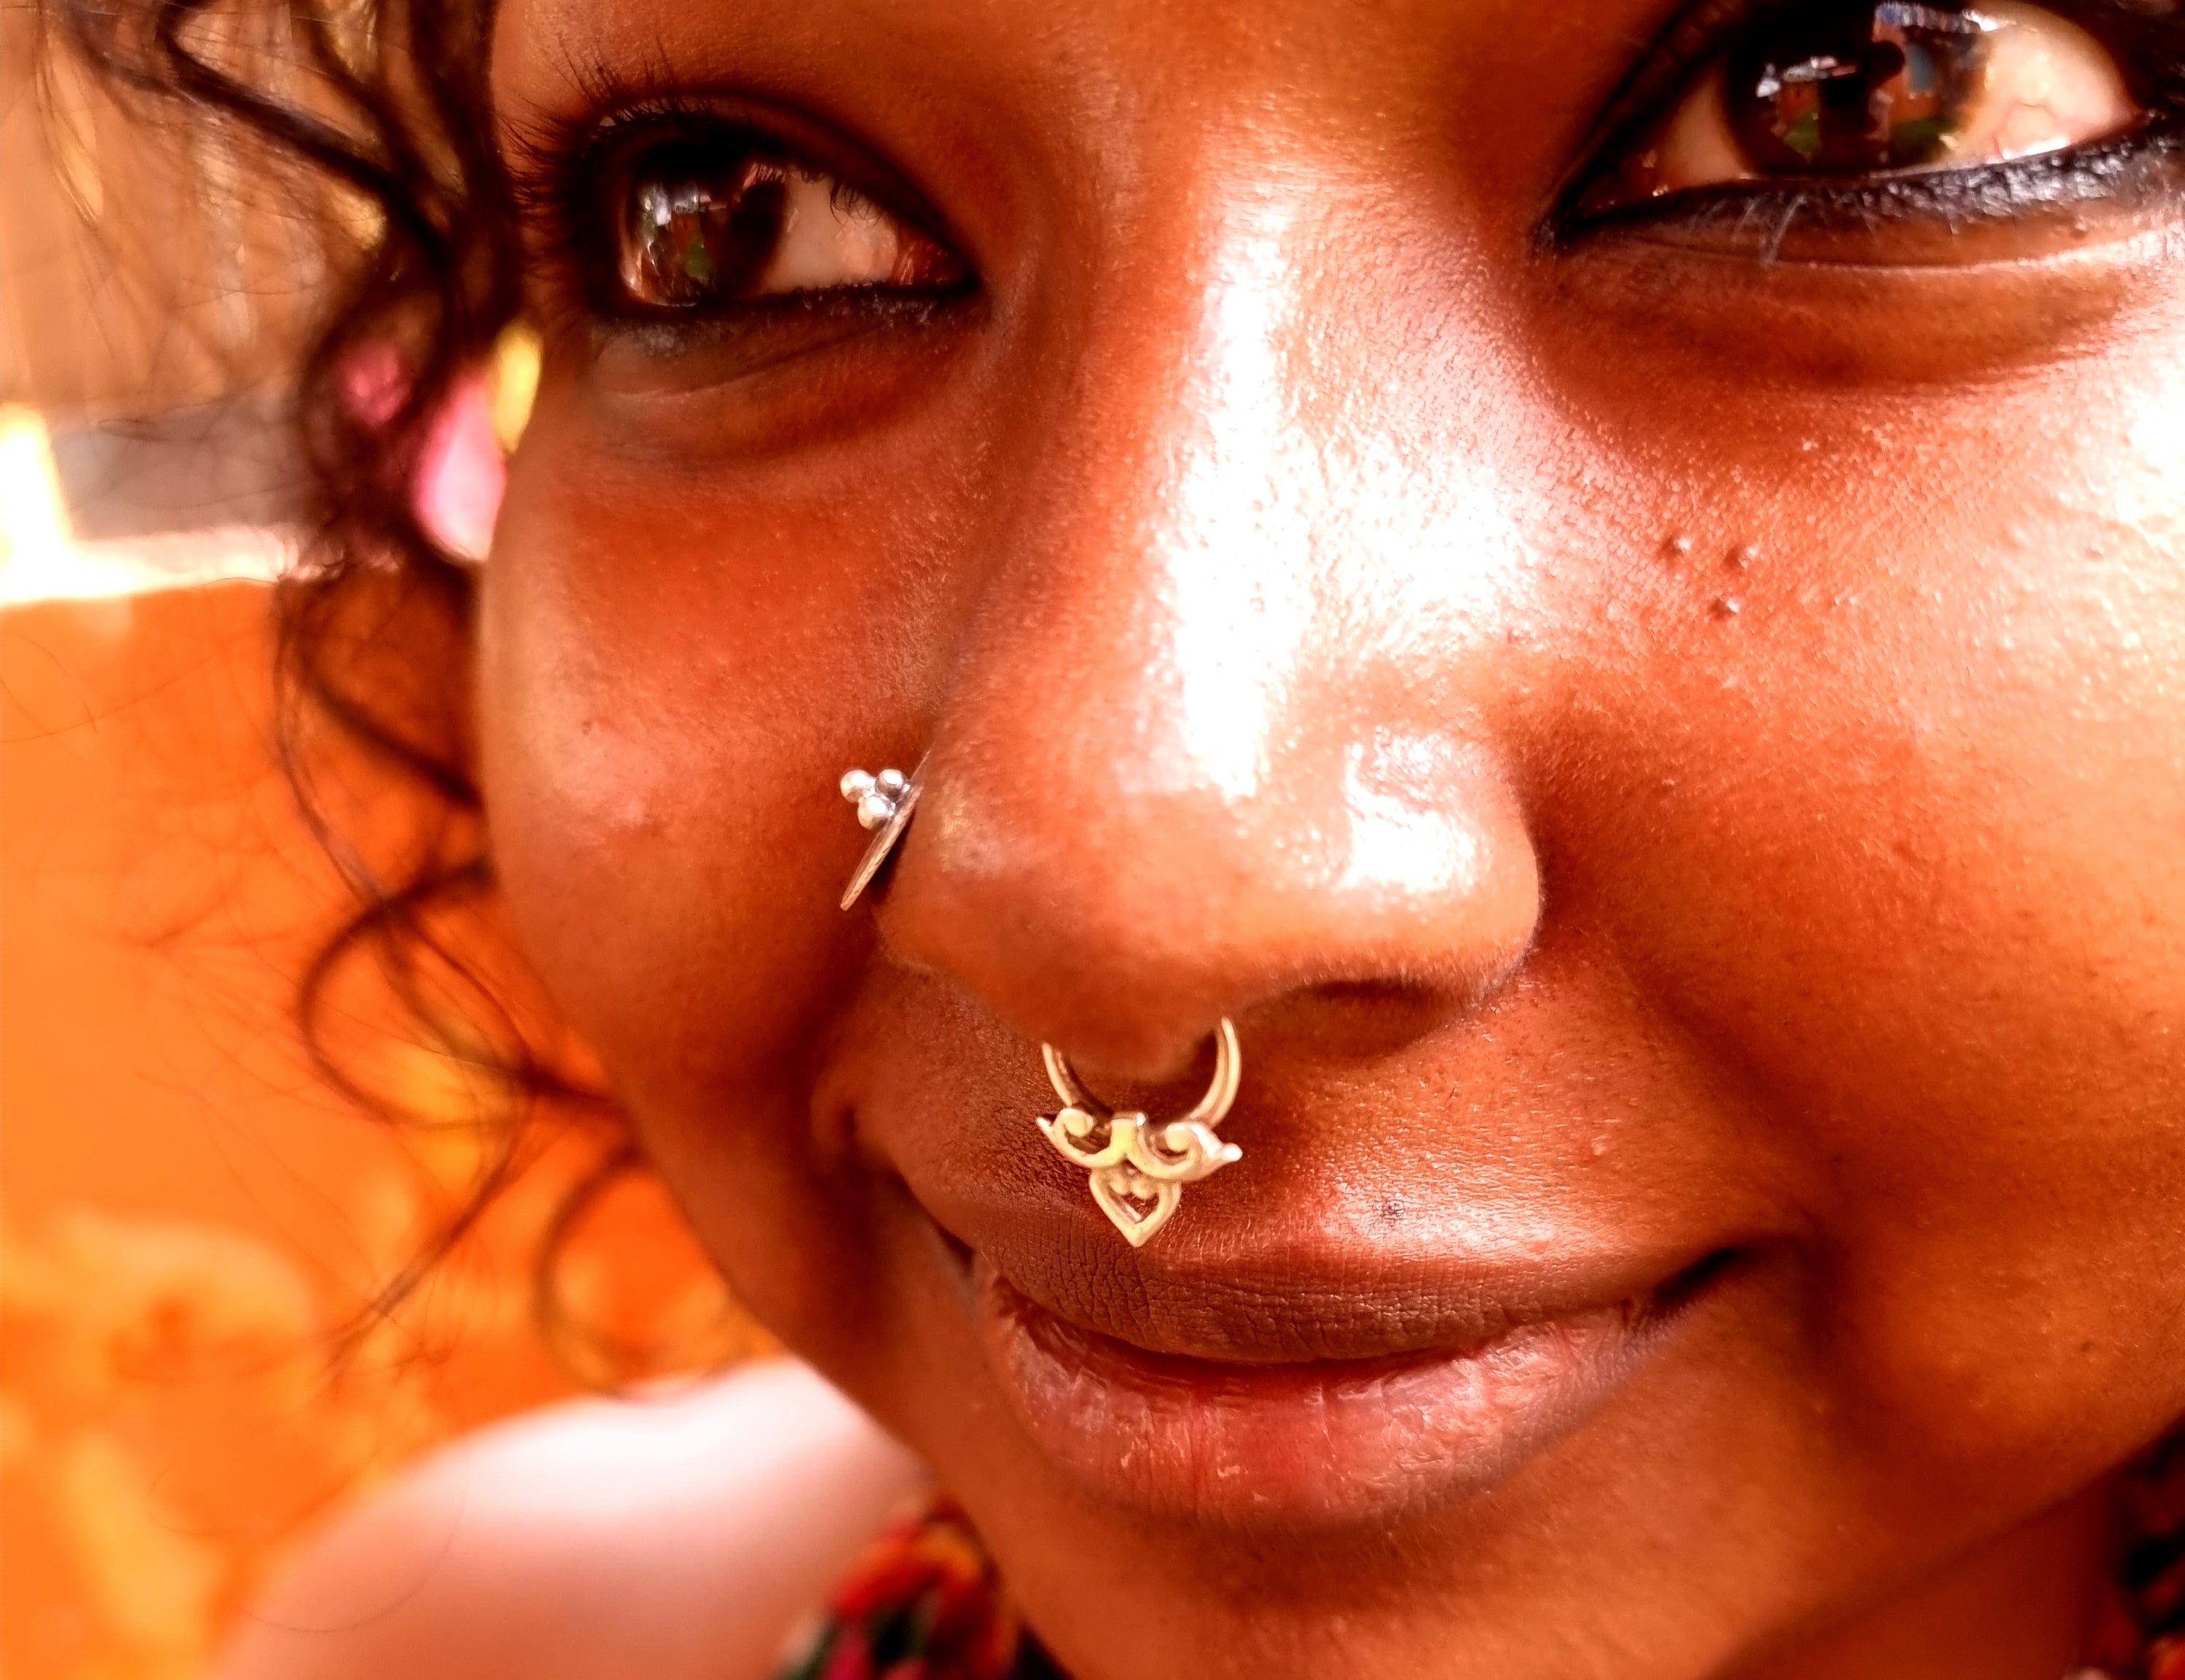 Buy Silver septum rings Online - Jaali Septum Ring - Quirksmith